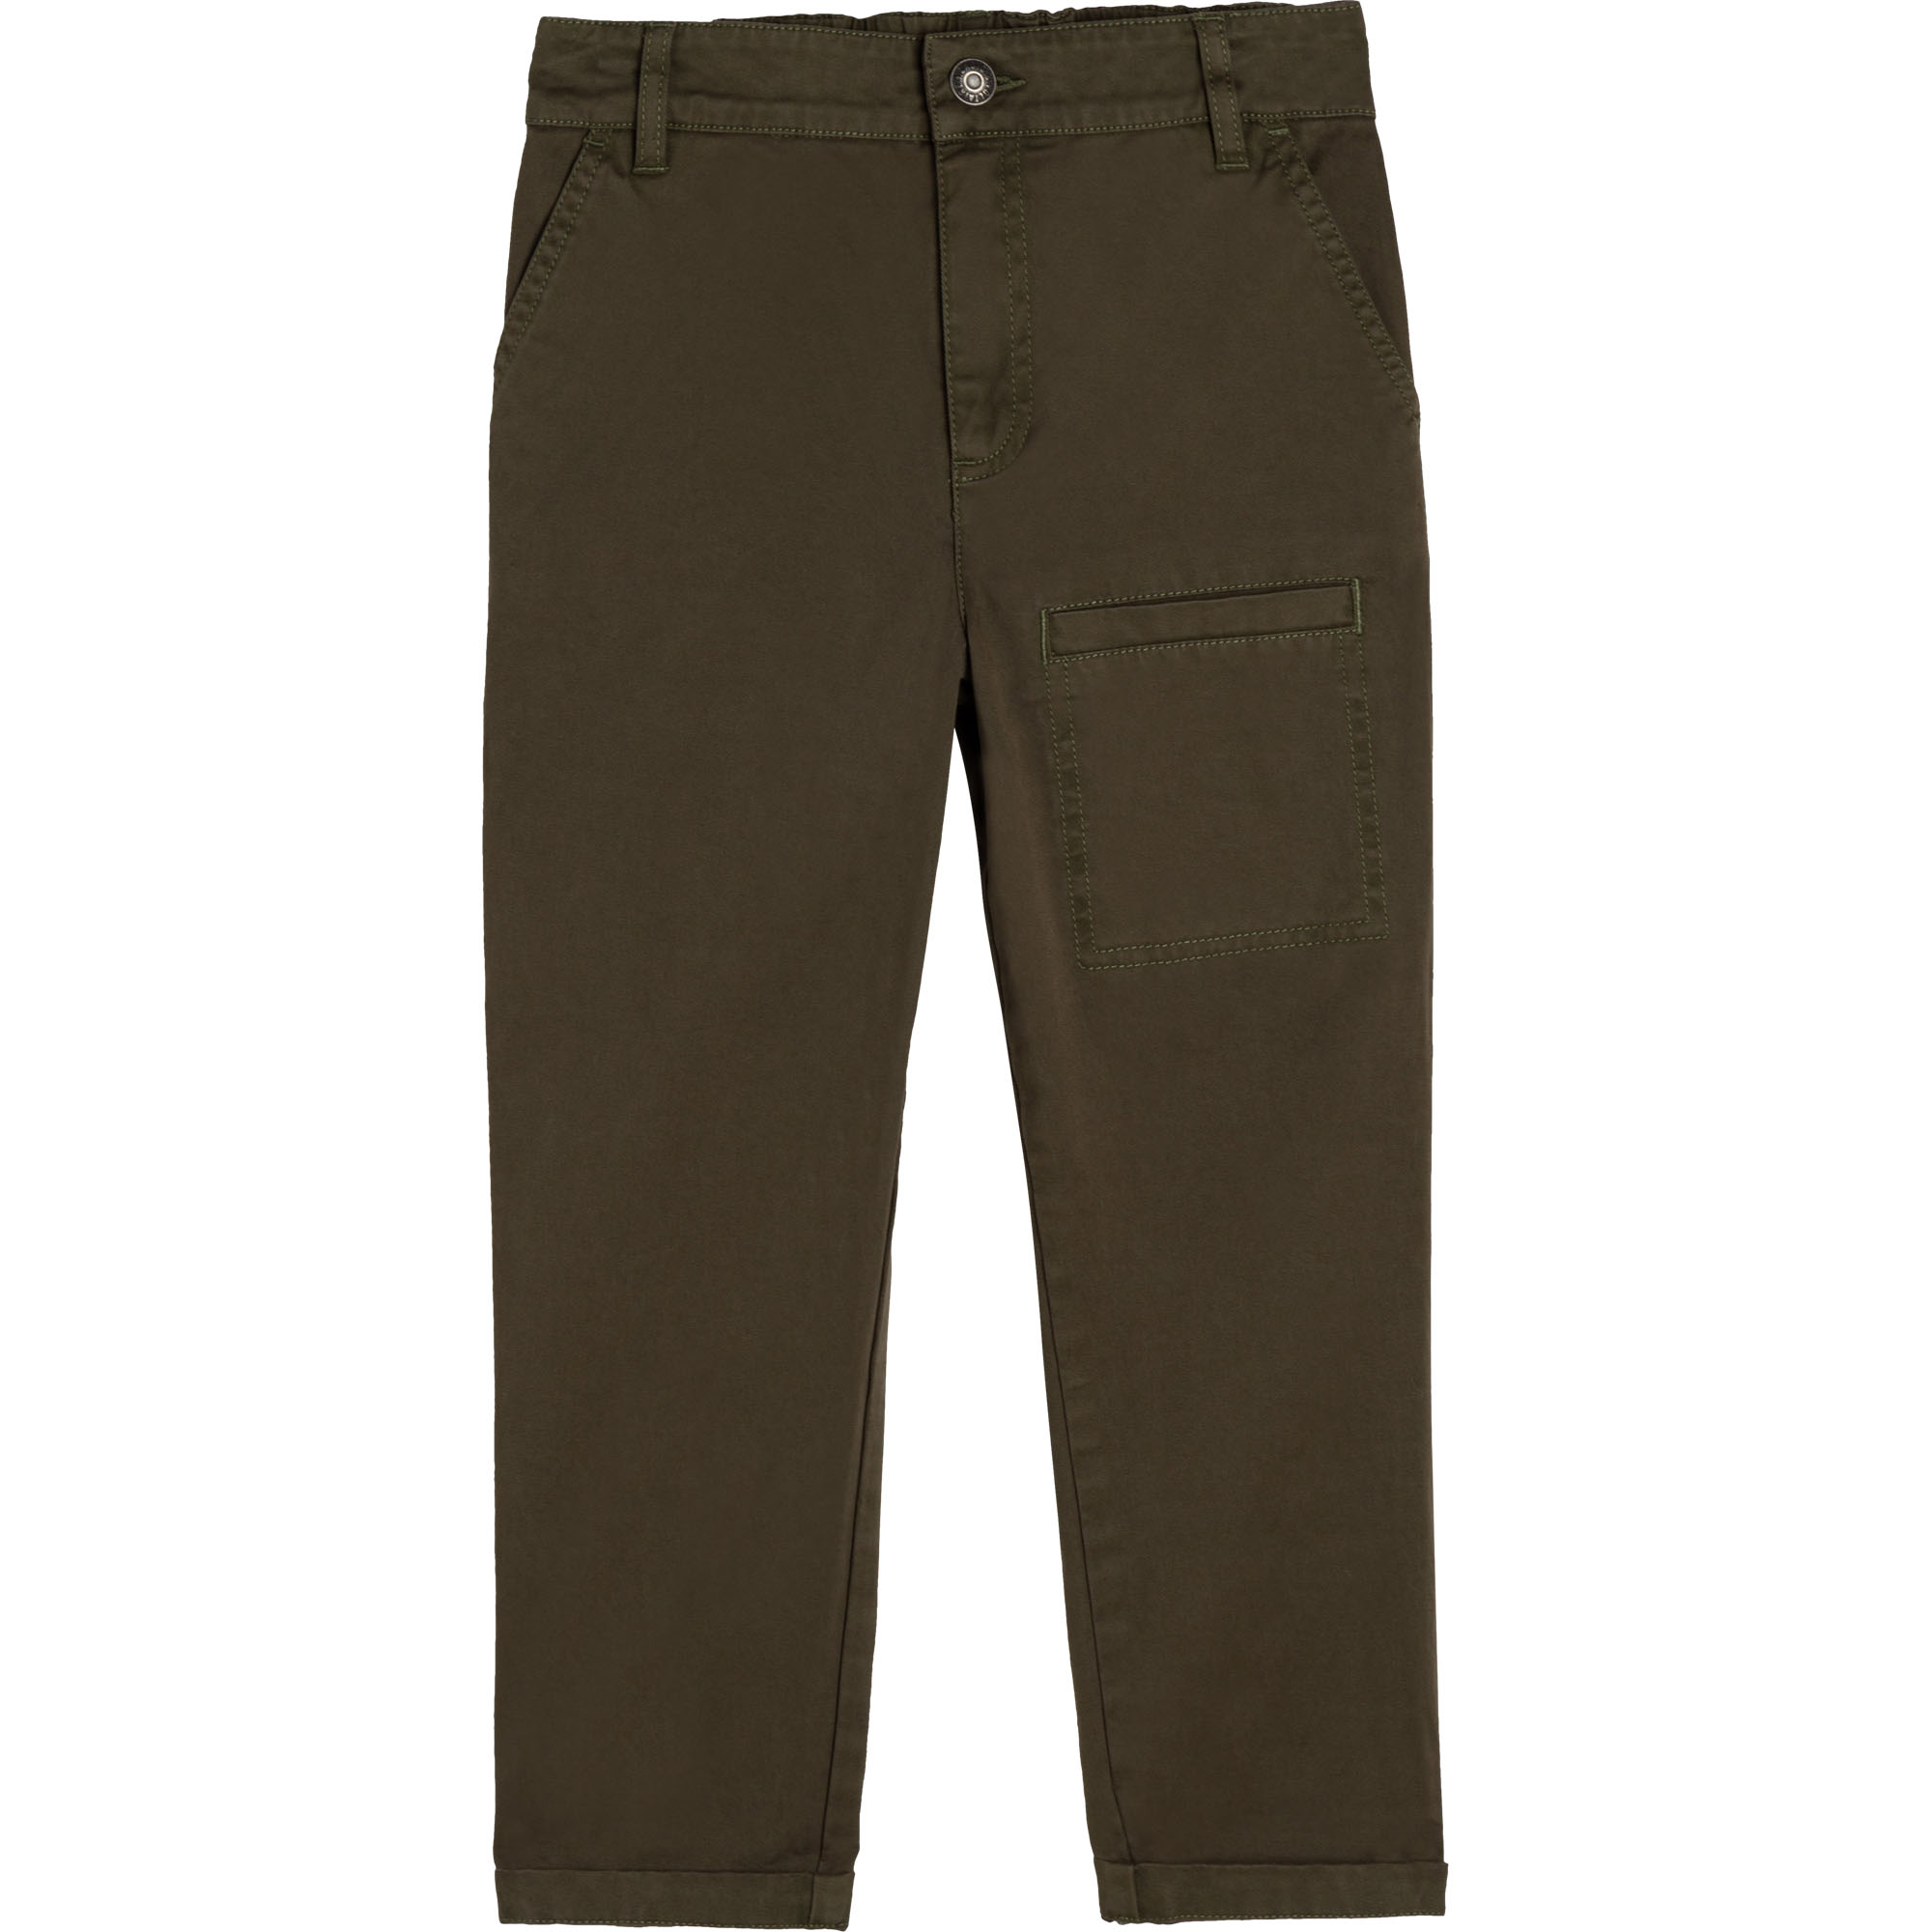 Cotton drill trousers ZADIG & VOLTAIRE for BOY